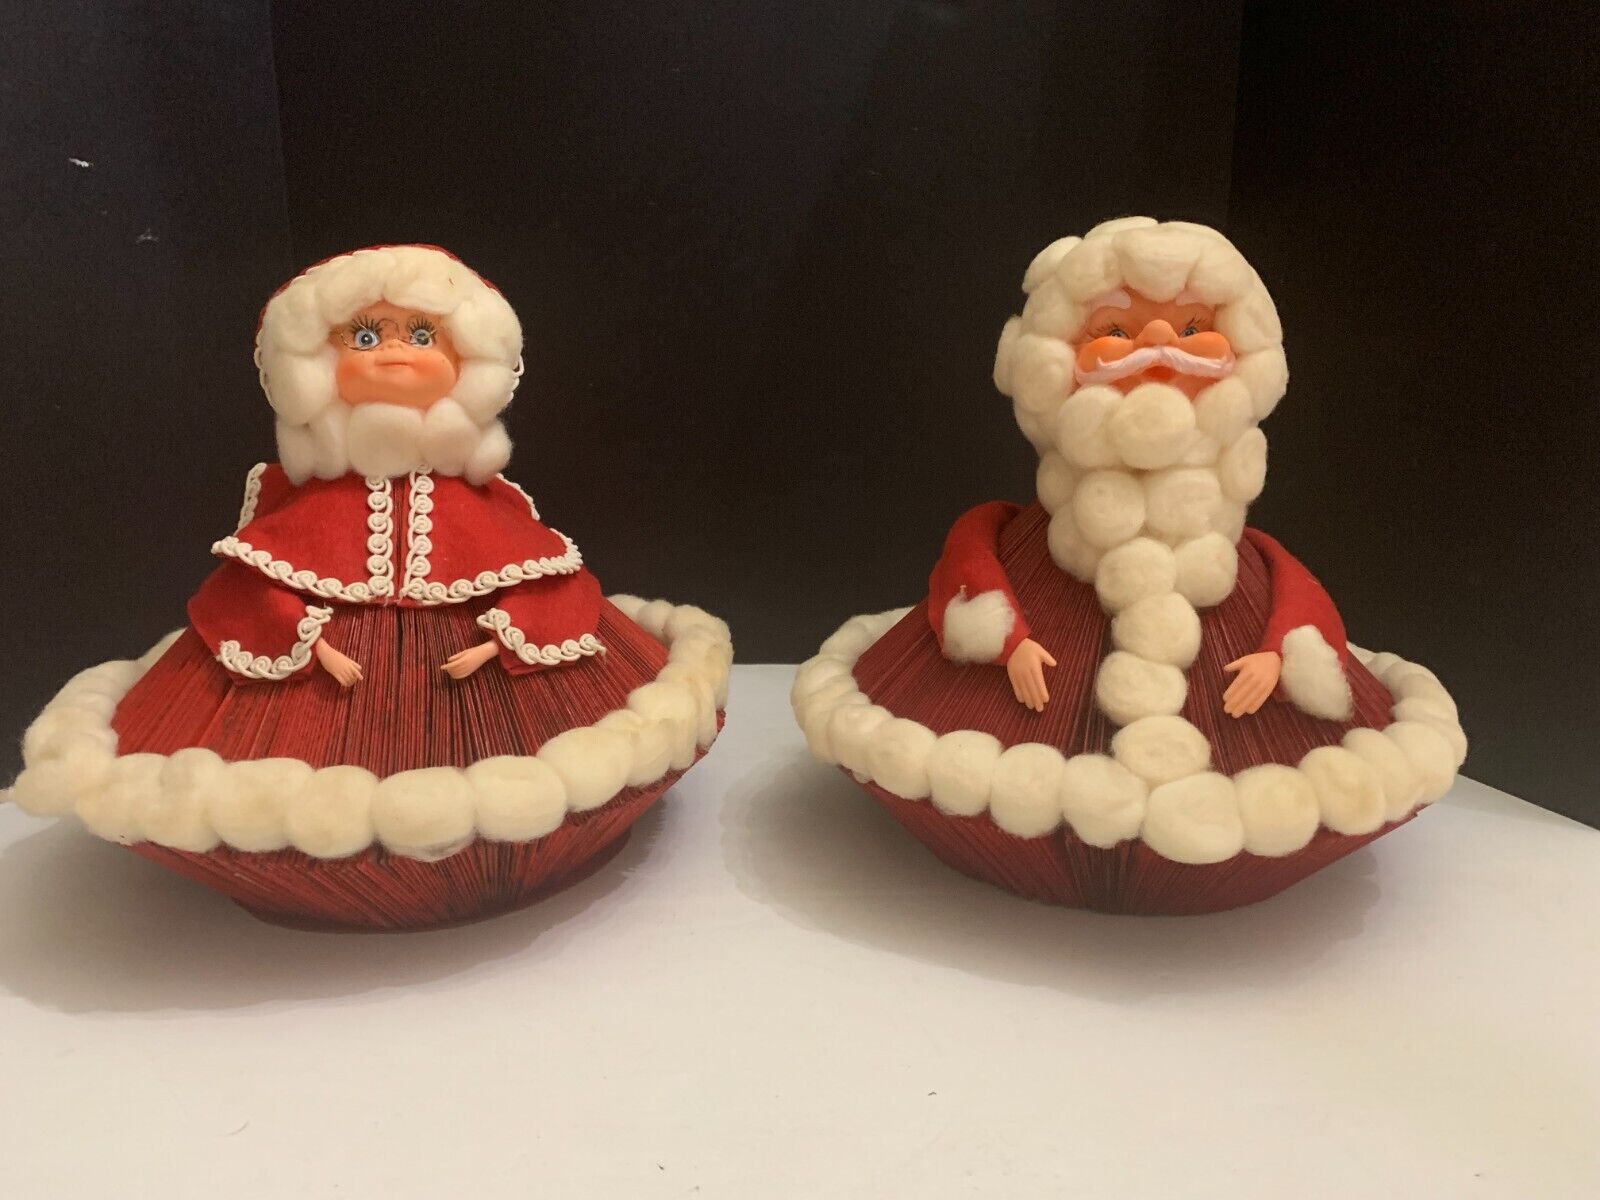 Vintage c1950s Handmade Folded Book Santa Claus and Mrs. Claus Christmas Figures